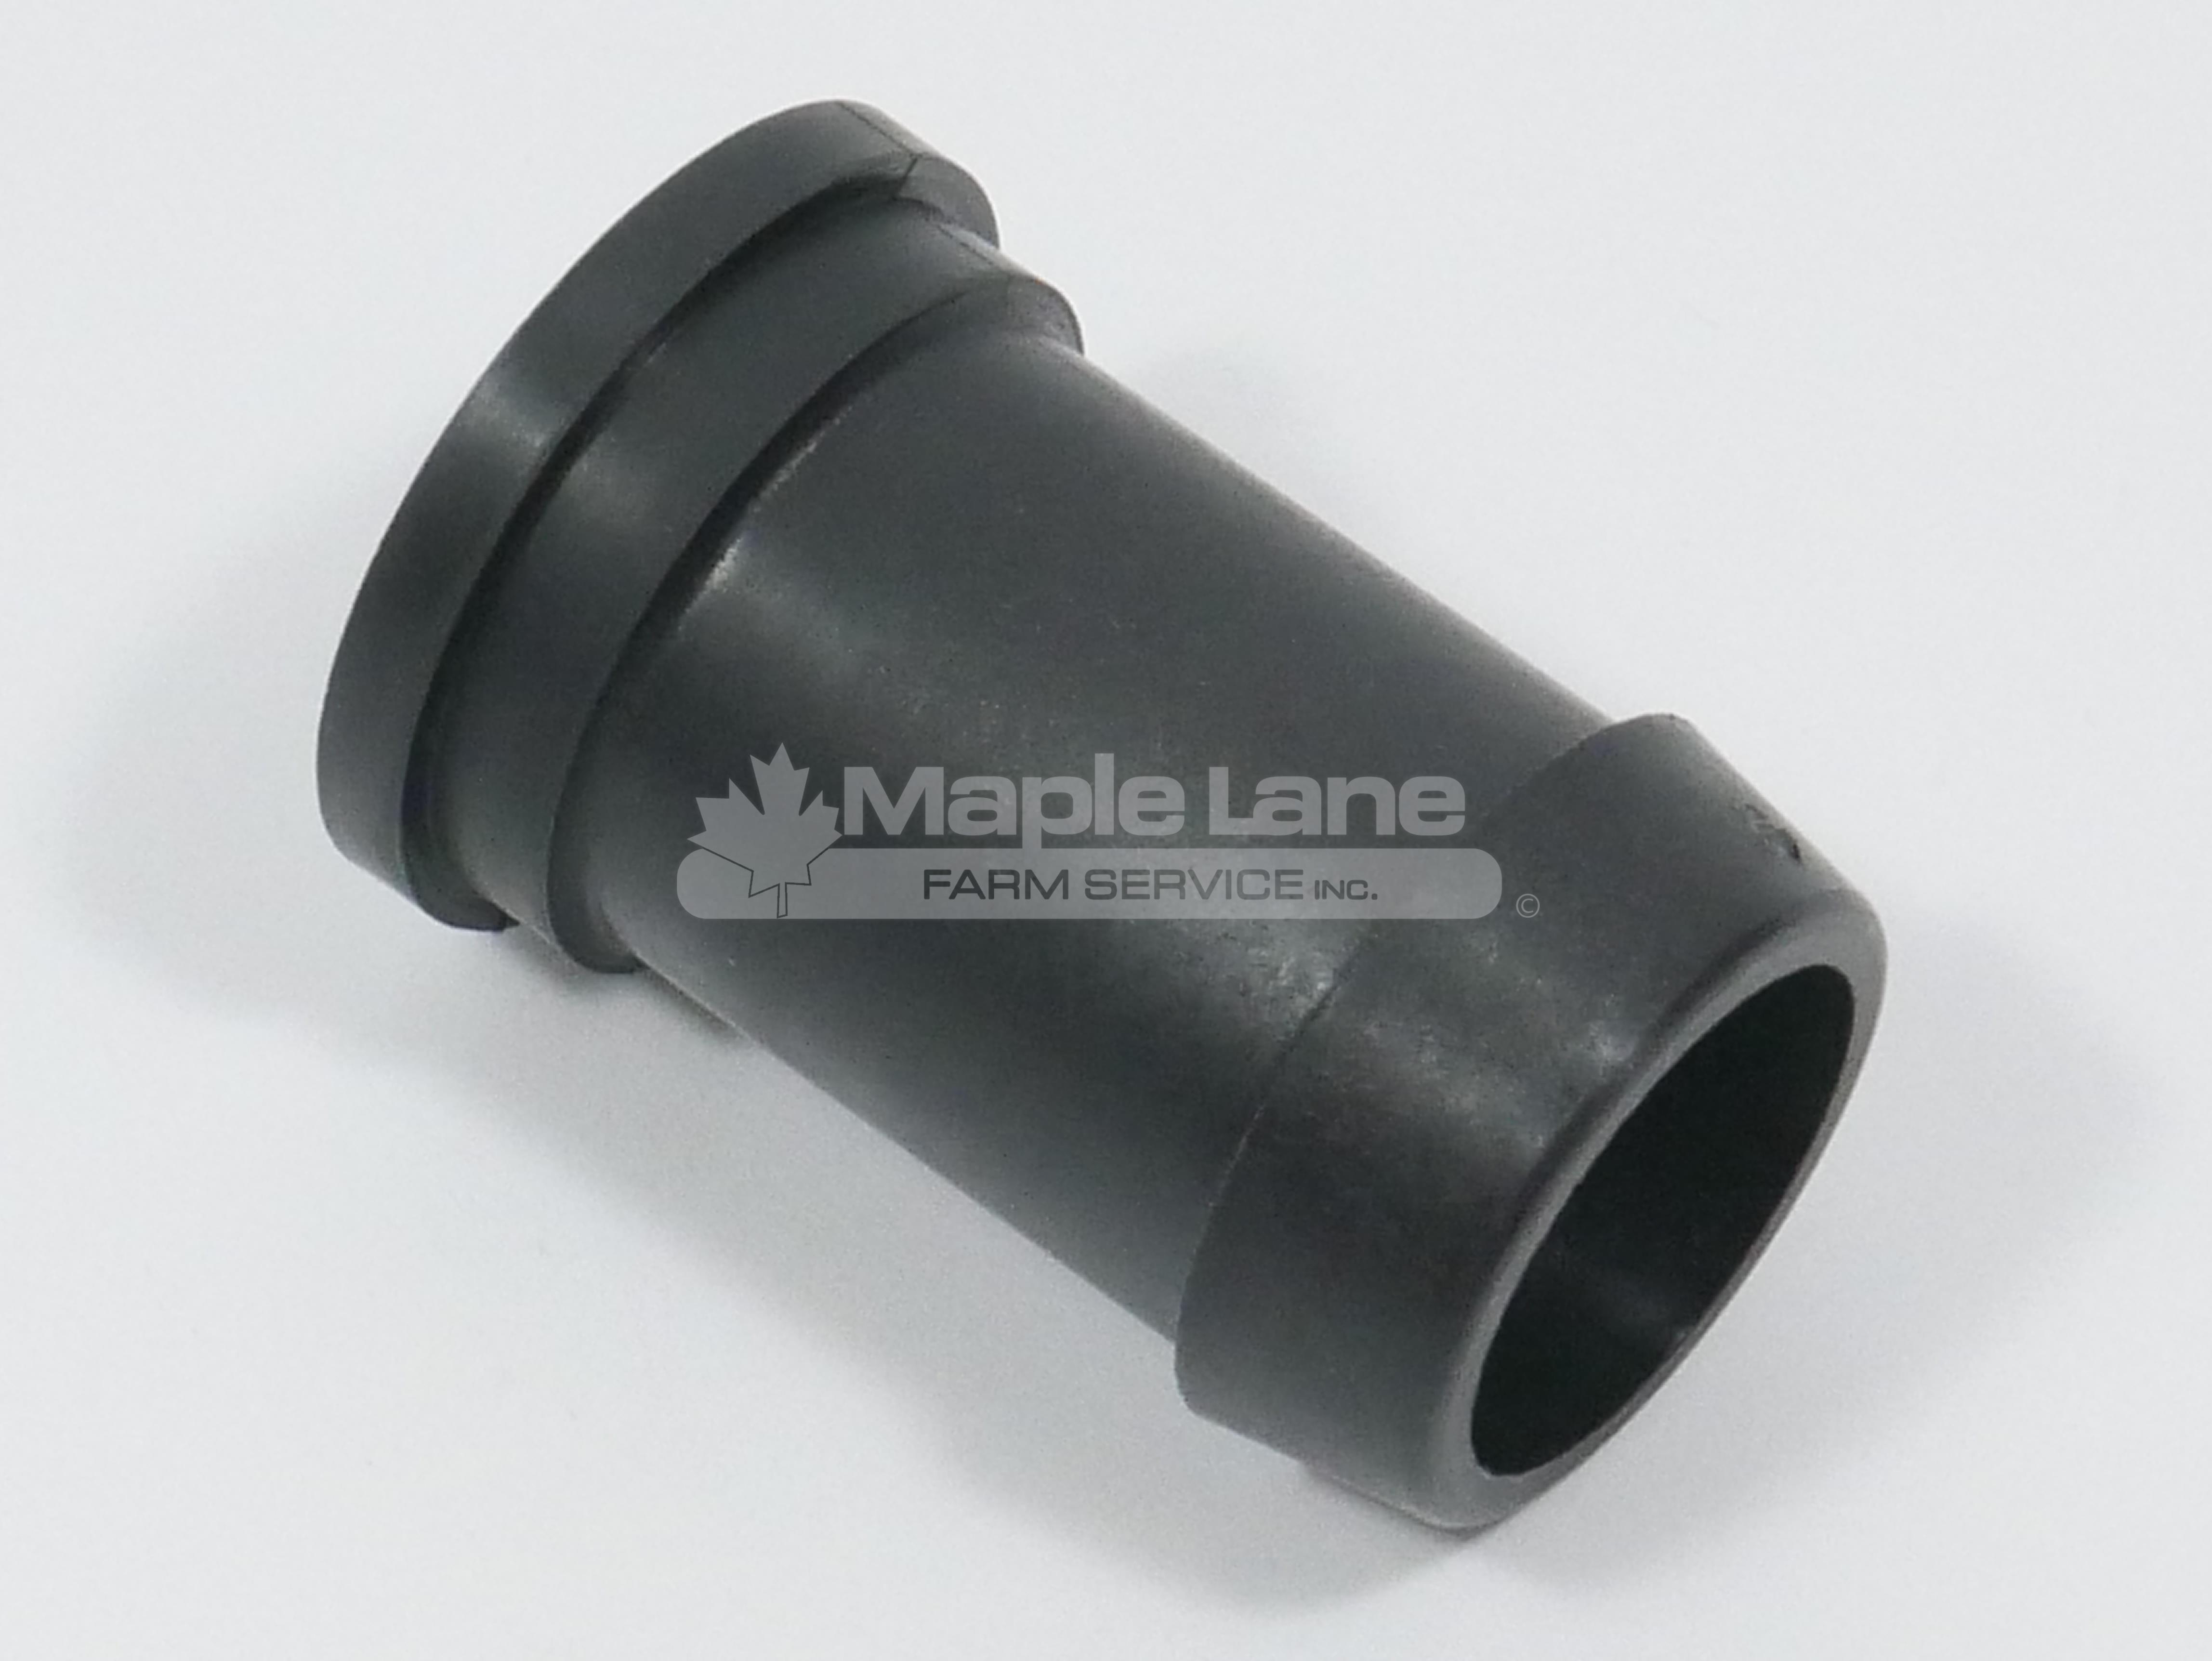 330341 Fitting 1" HB for 1" Nut